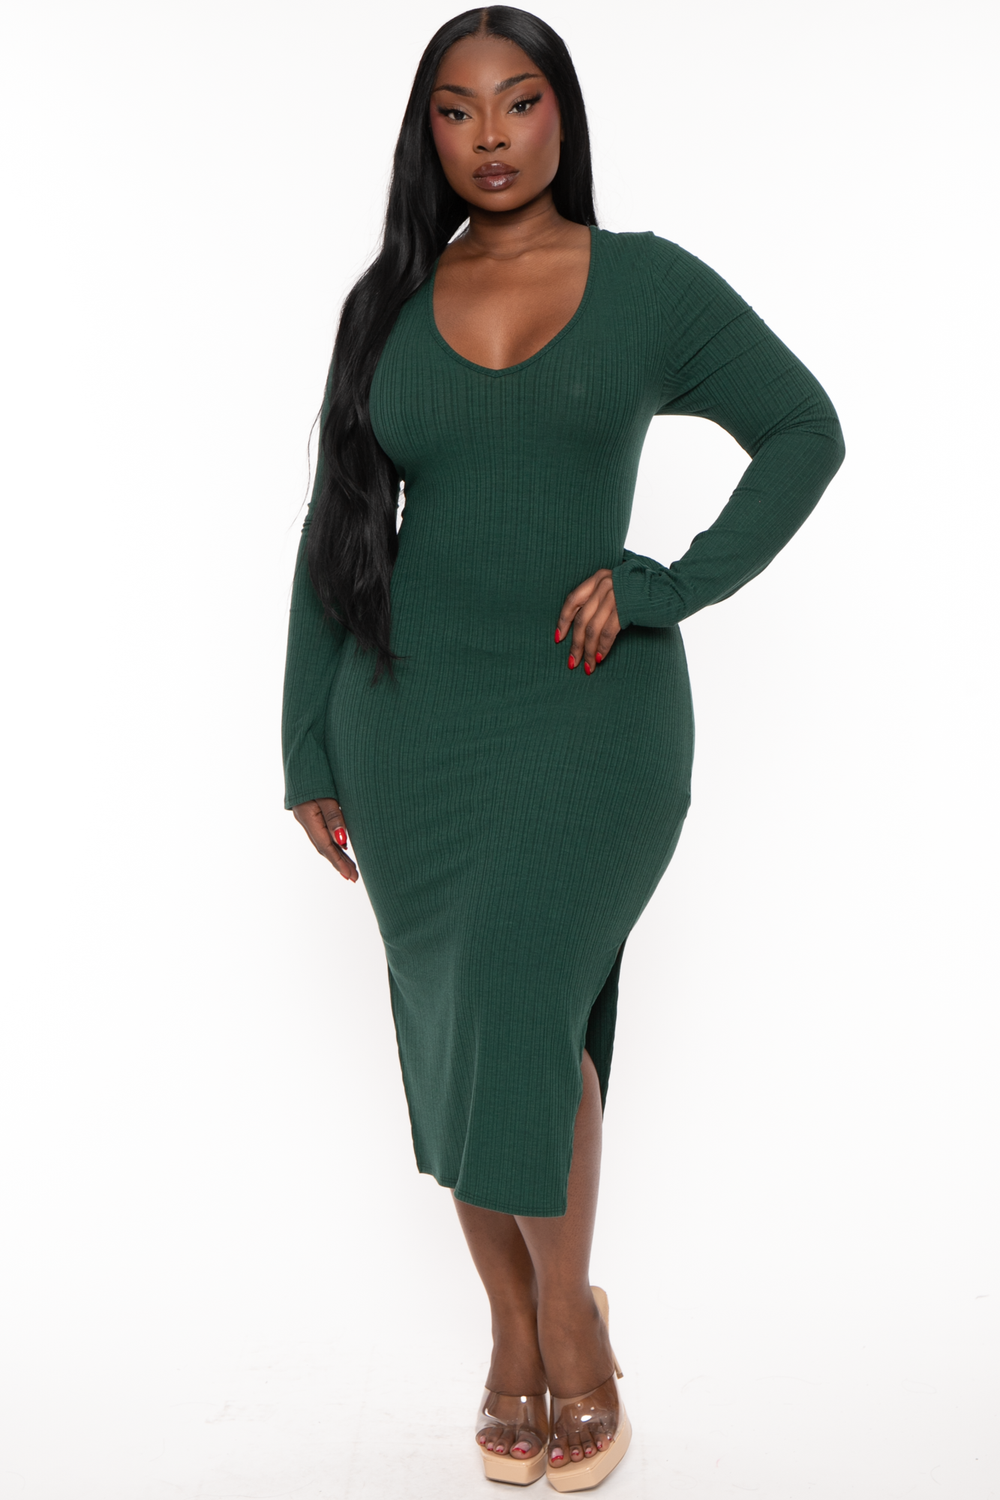 Plus Size Outfits With Leggings 5 best - curvyoutfits.com  Plus size  fashion, Plus size leggings, Plus size outfits